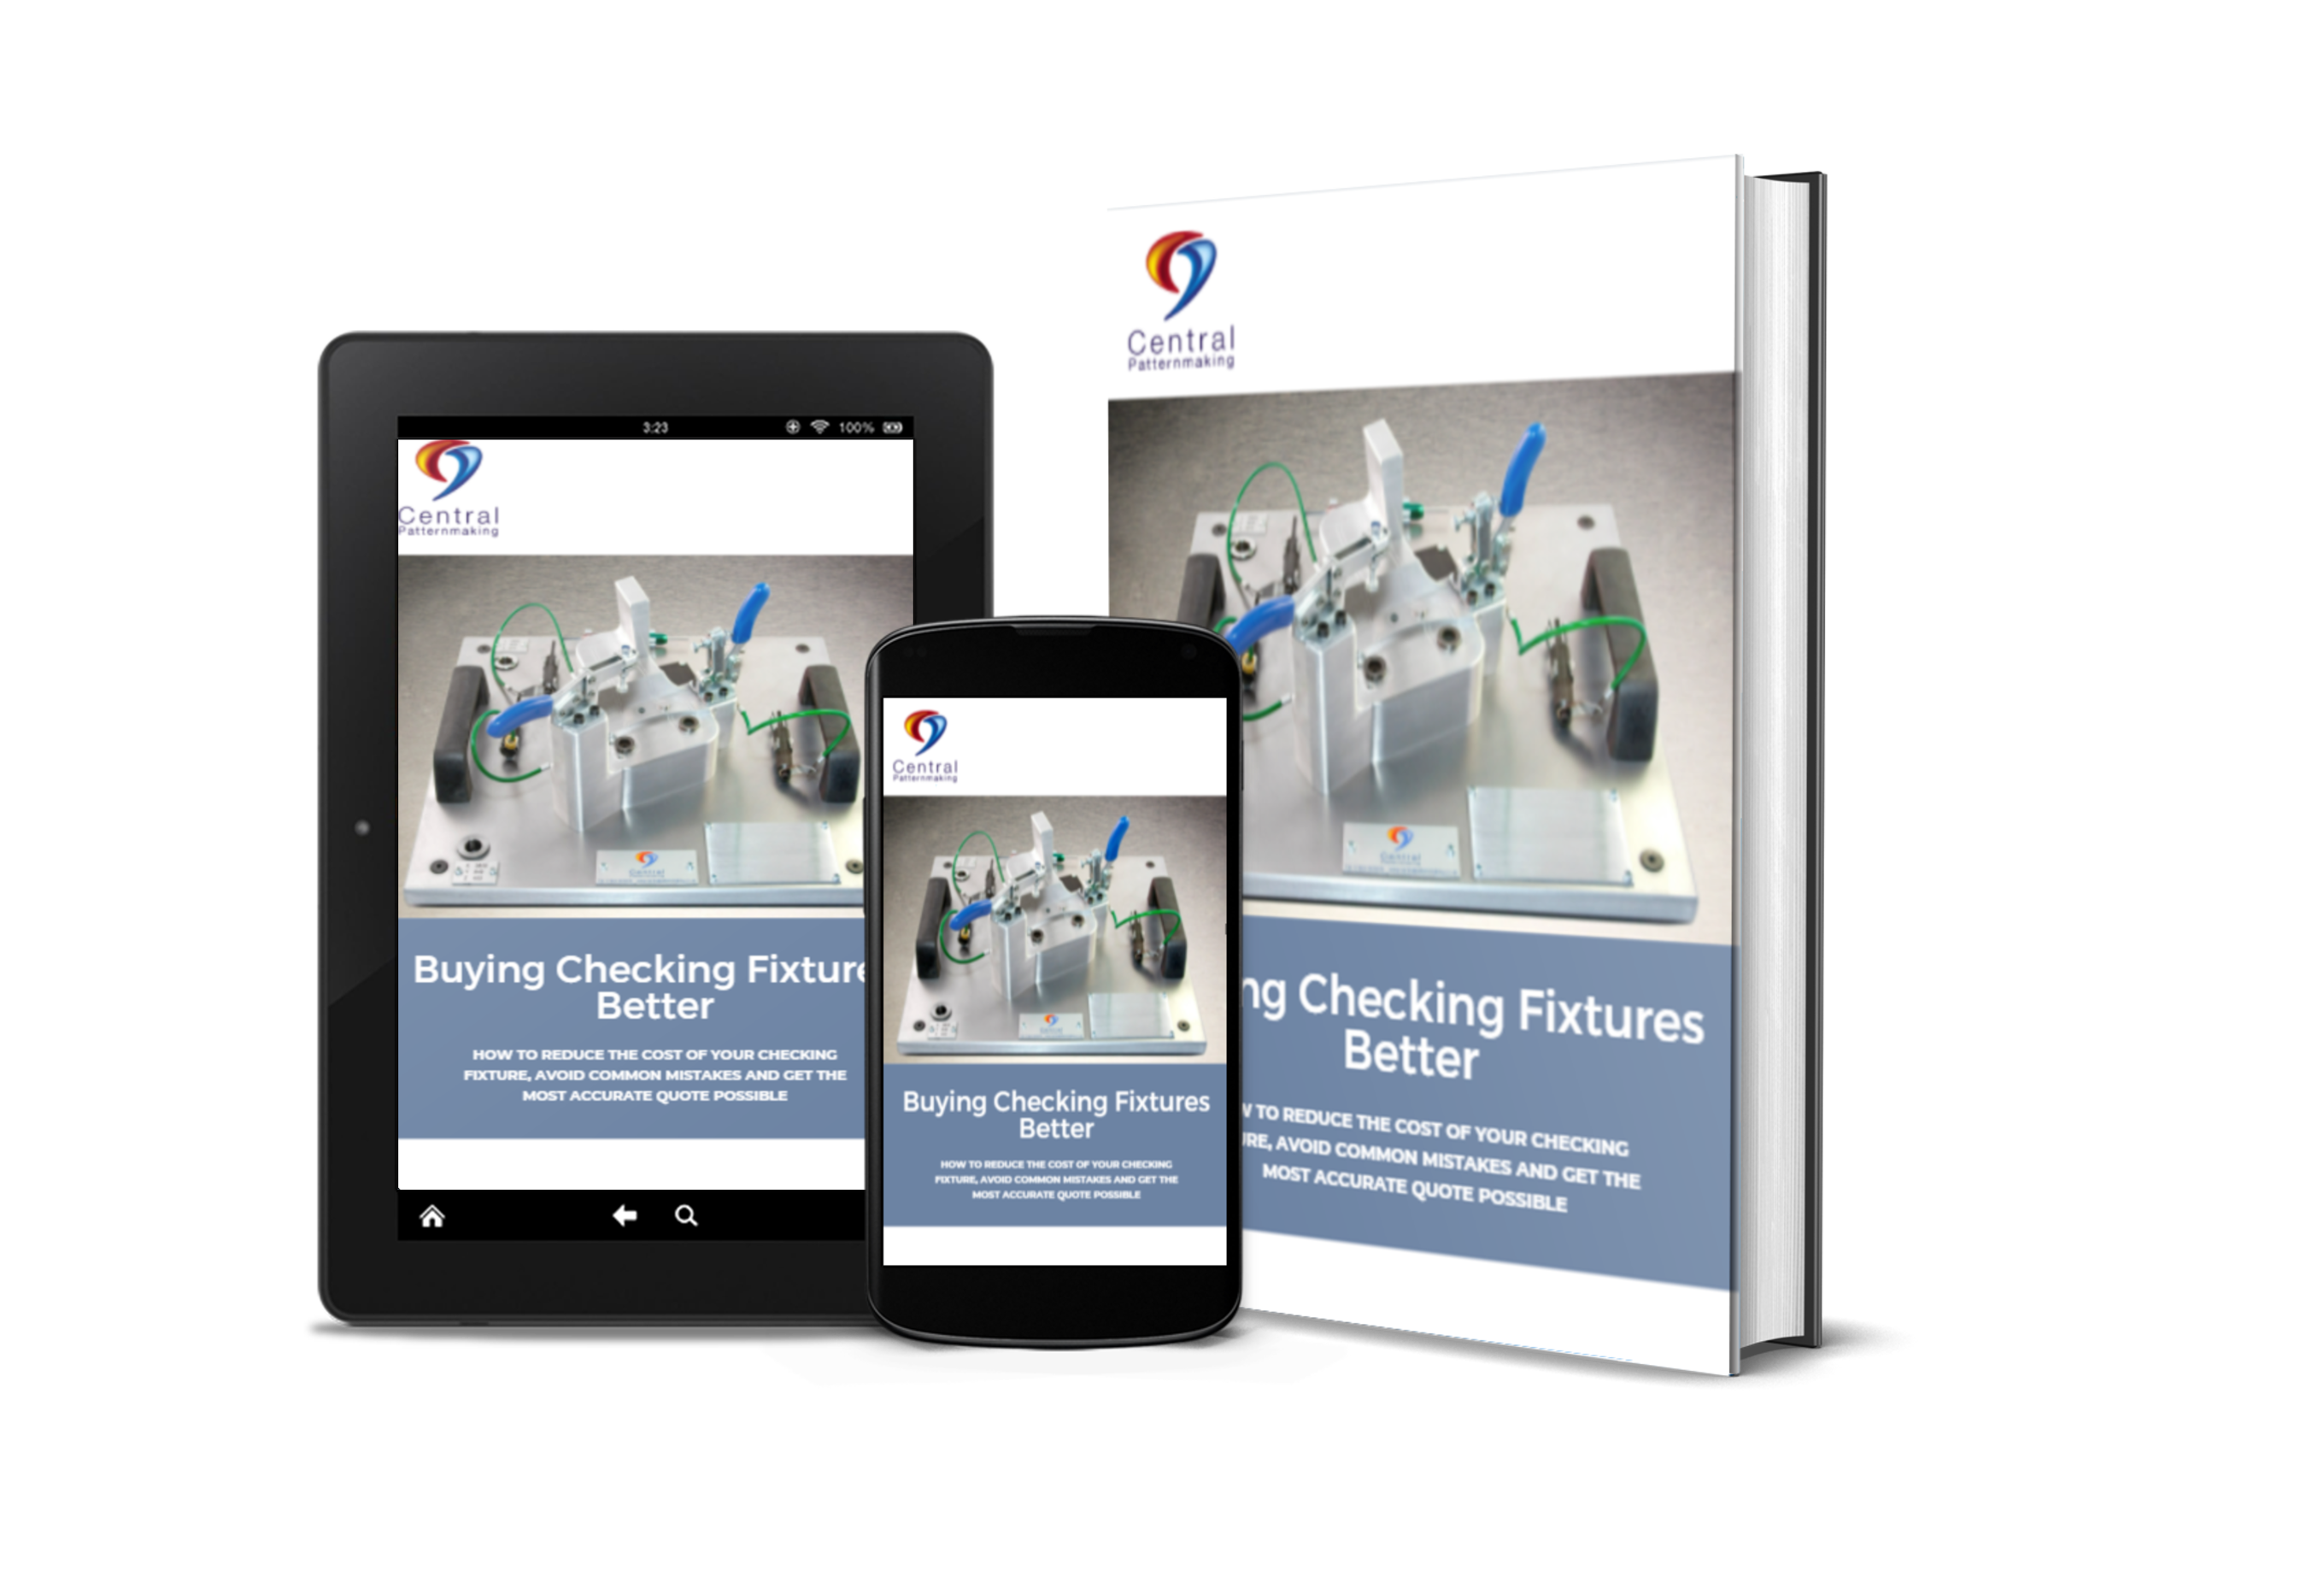 Buying Checking Fixtures Better Guide depicted on a smart phone, tablet and book cover